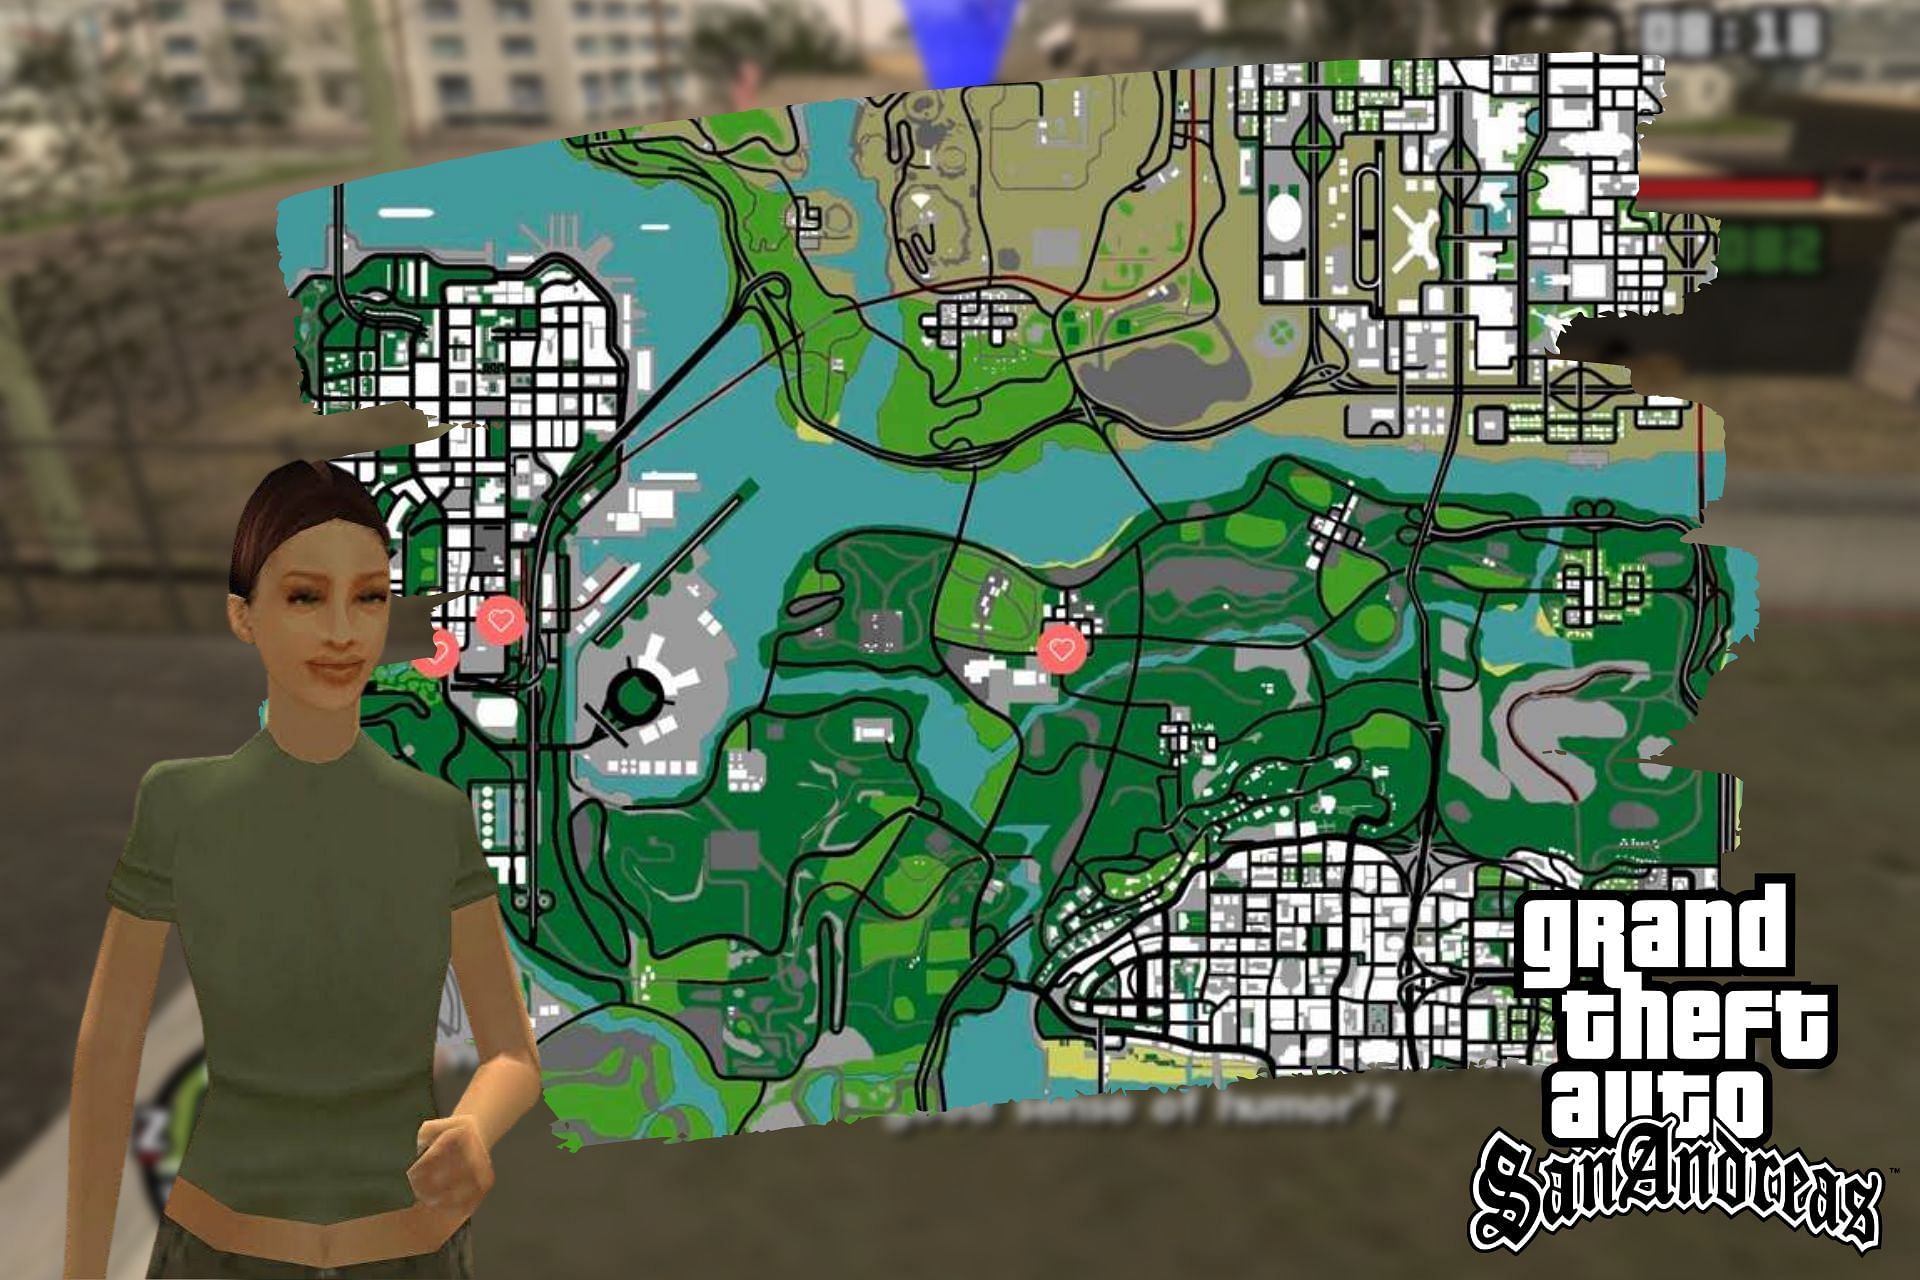 Dating in GTA San Andreas is one of its most memorable feature (Image via Sportskeeda)